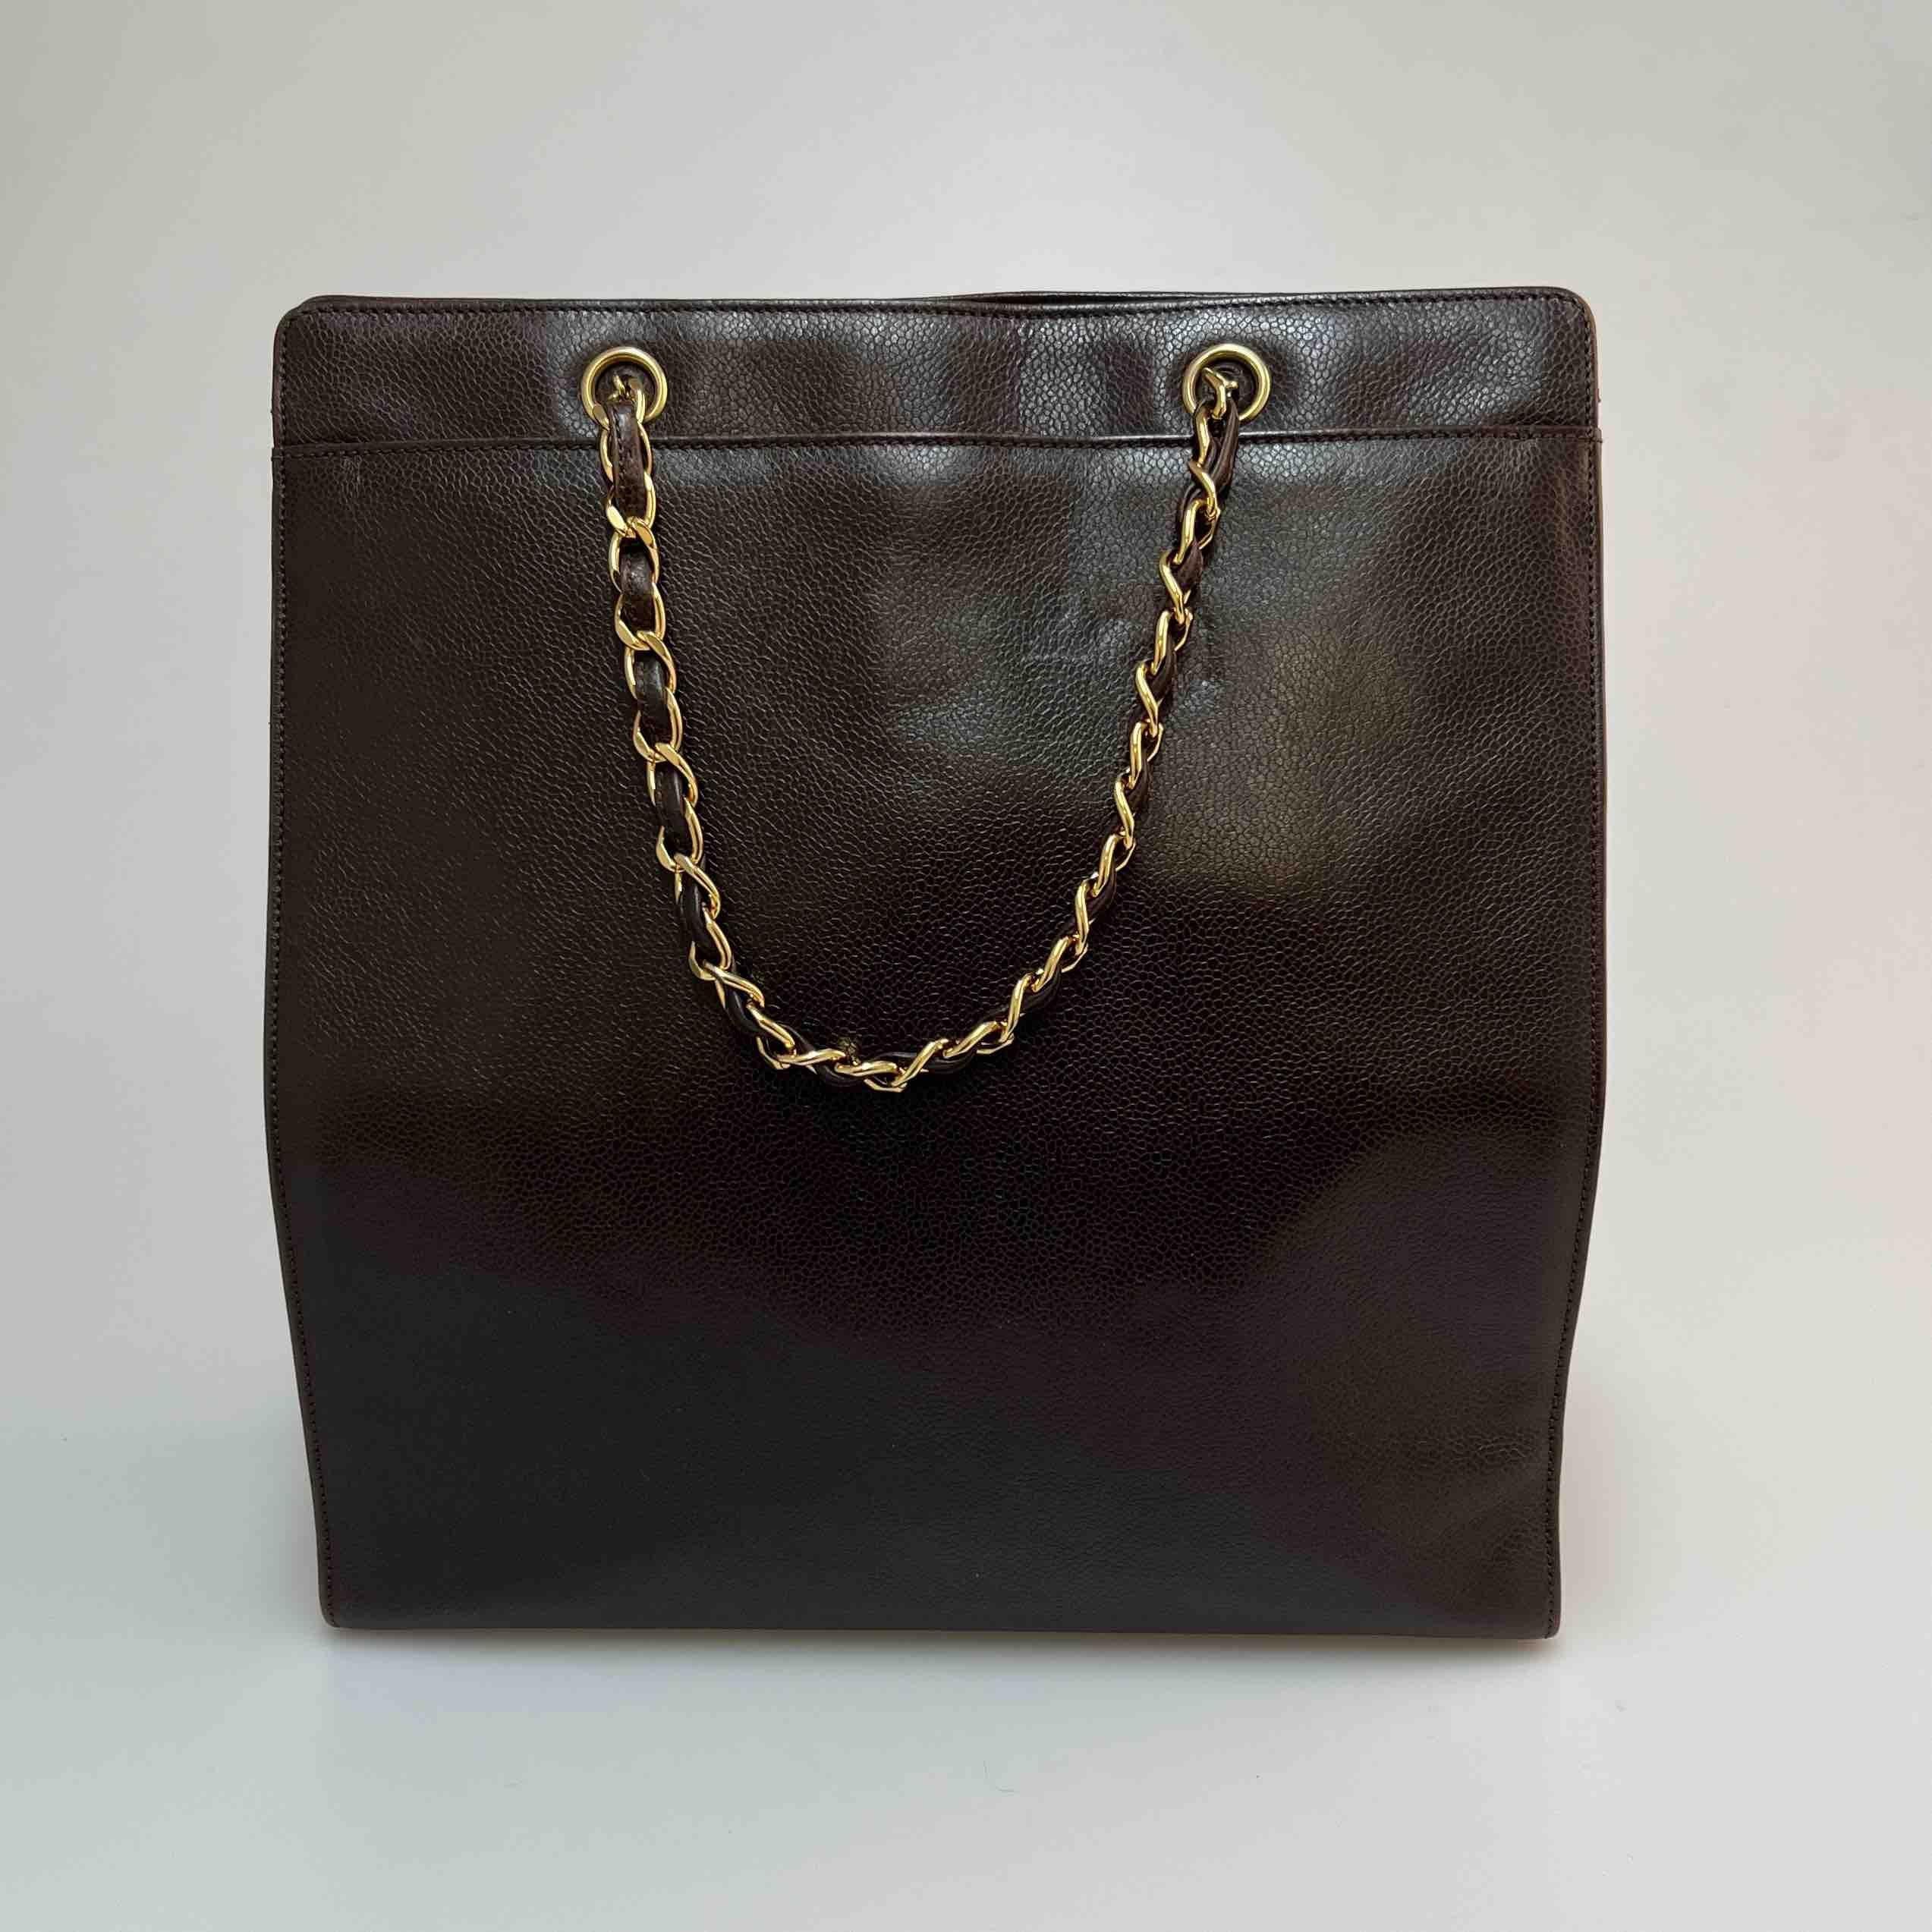 Vintage CHANEL Tote Bag in Brown Grained Leather. Magnetic clasp, worn on the shoulder. The hardware is in gilt metal.
In good condition.
Made in Italy.
Size: 33 x 31 x 11cm
Handles: 40 cm
Hologram: 1342...Year: 1989-1991

Will be delivered in its